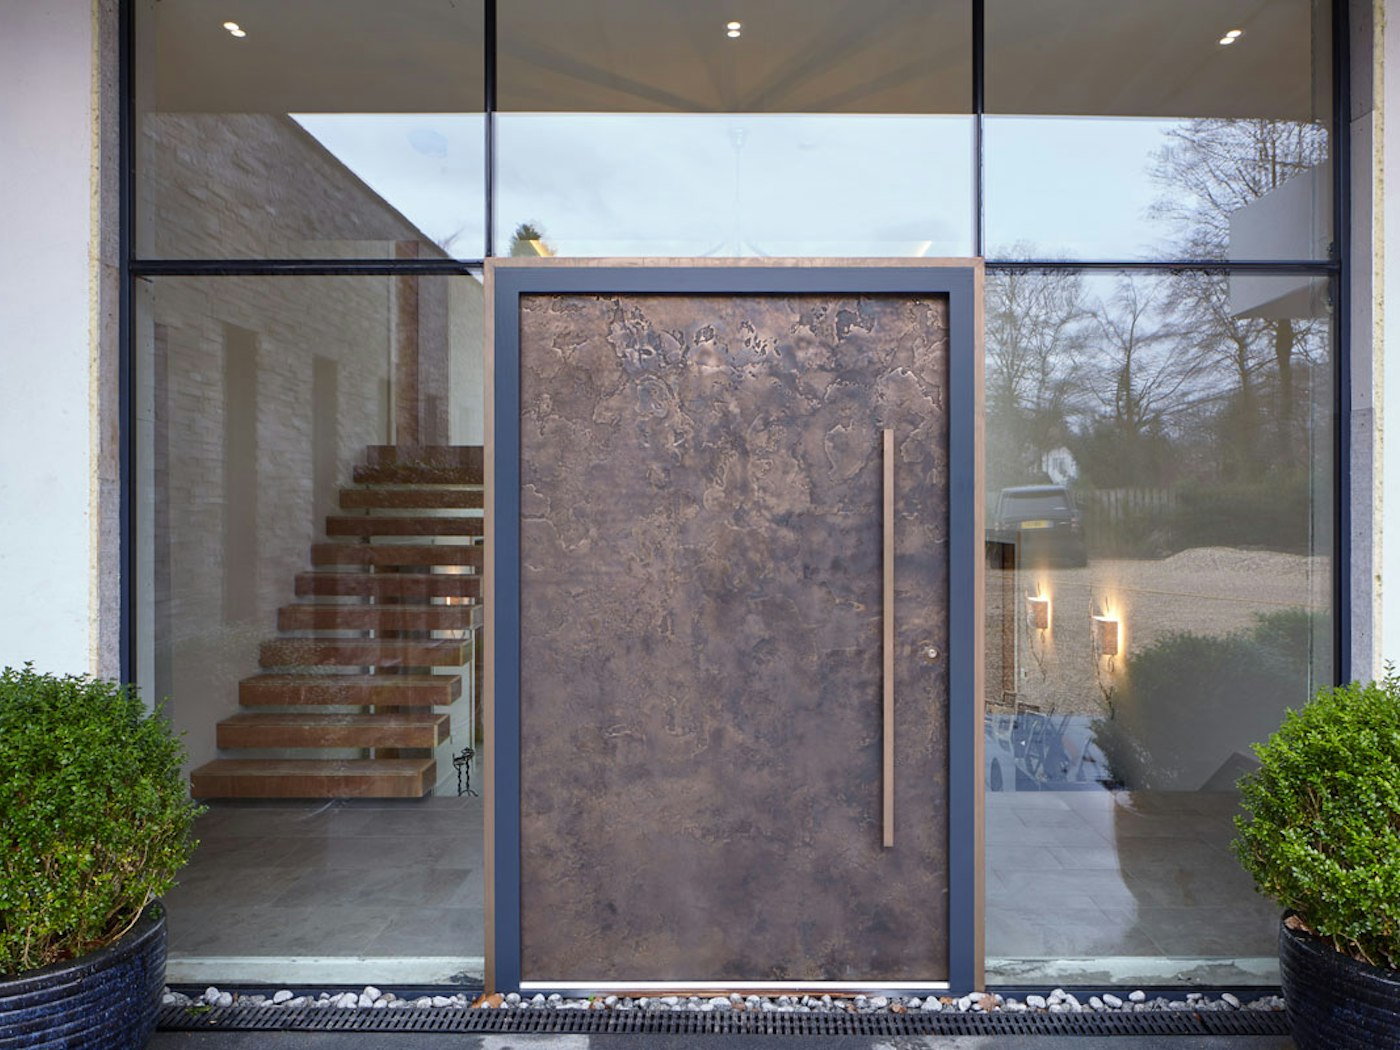 Bronze ref. 101: Modern opulence is the statement of the day with our signature, textured bronze door finish